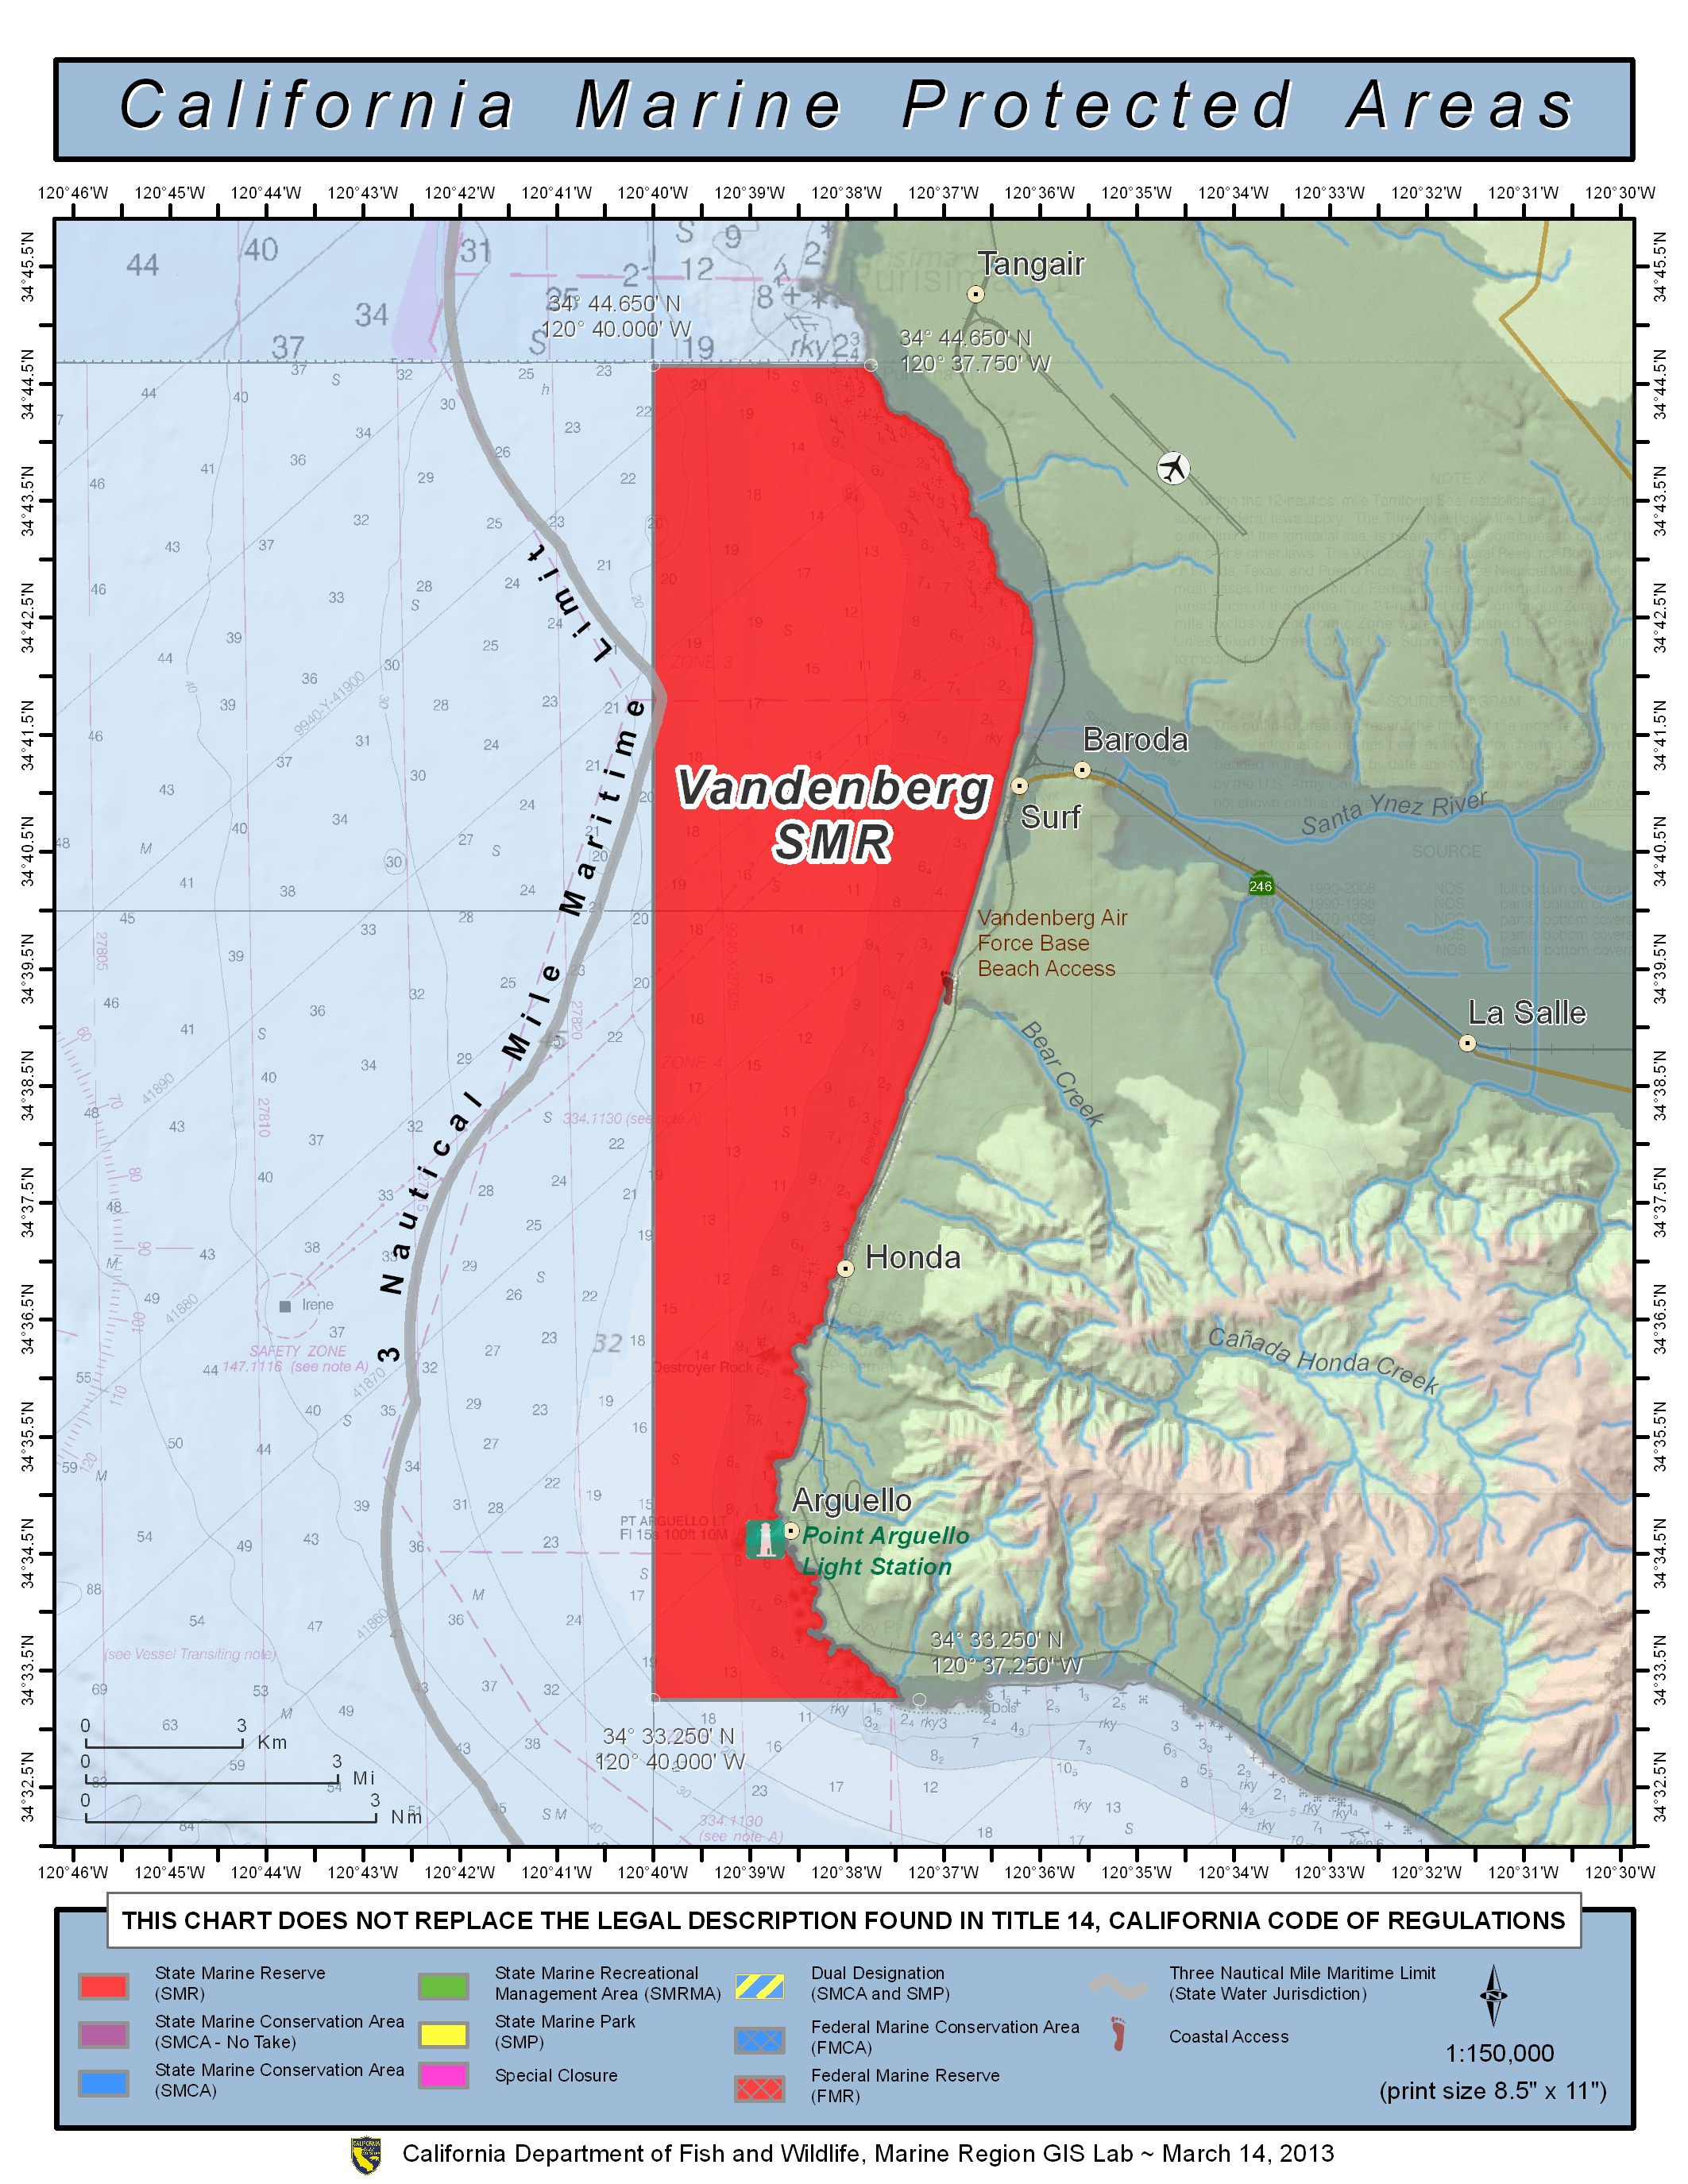 California Bill To Ban Oil Drilling In Marine Protected Area Fails! - California Marine Protected Areas Map